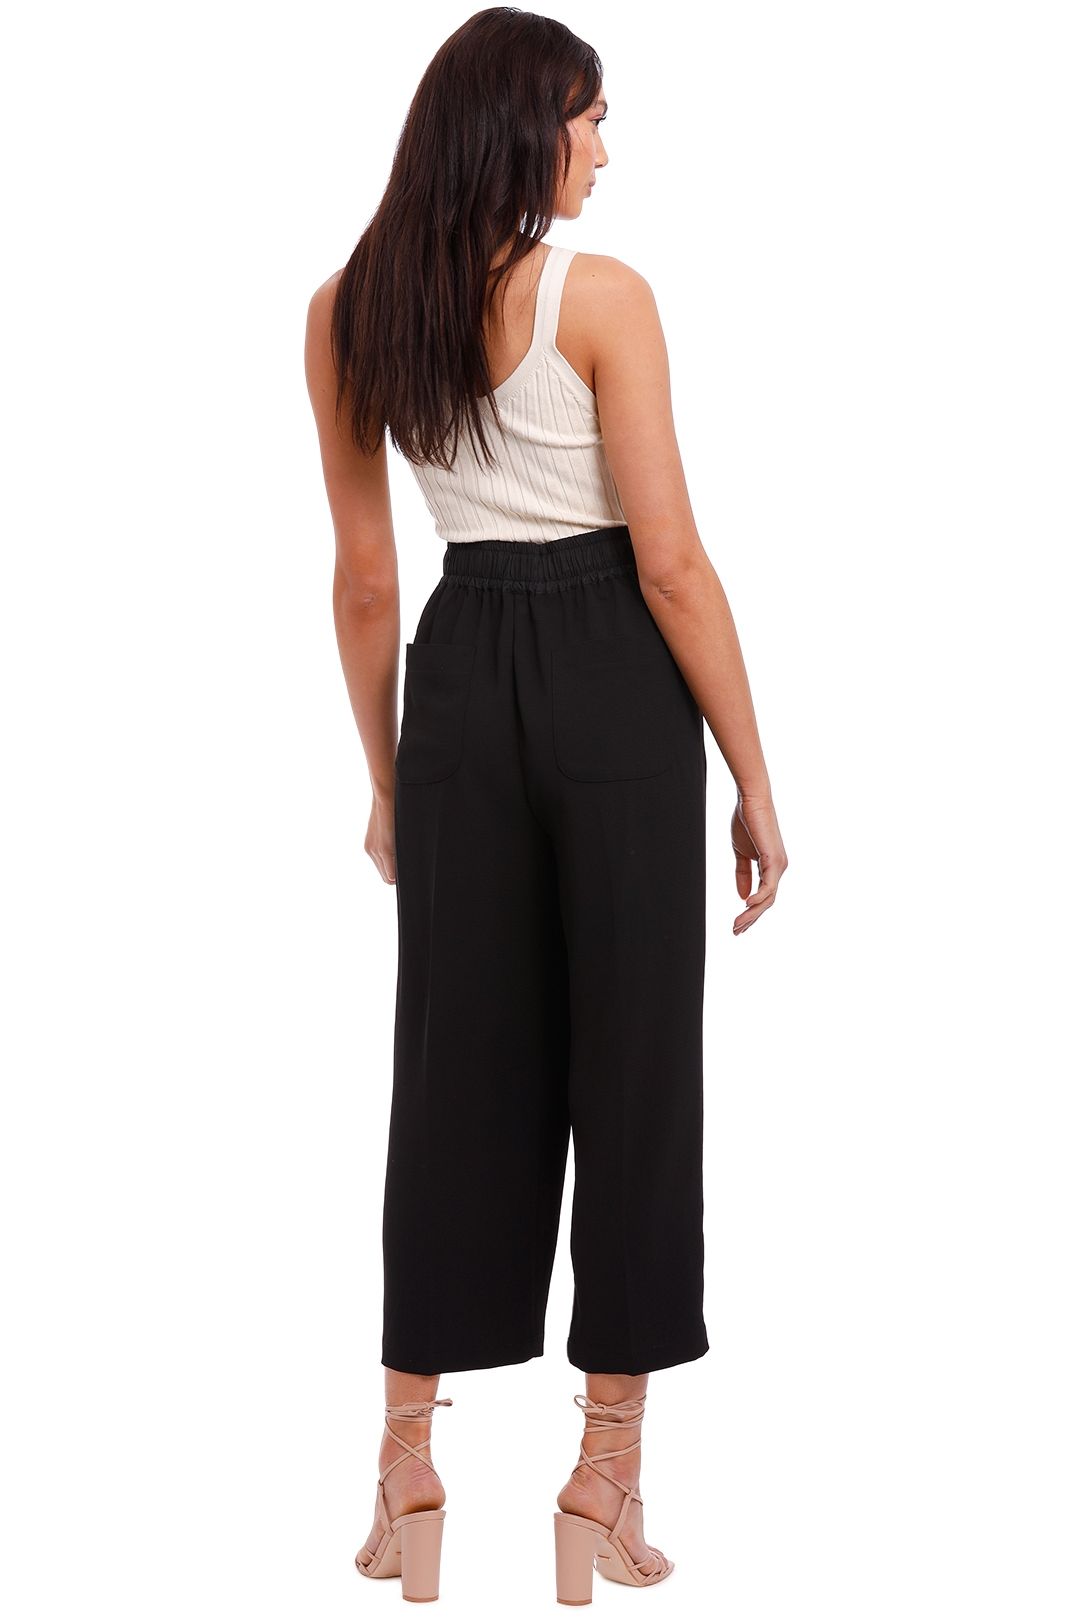 Curate by Trelise Cooper Kicking It Pant Black Relaxed